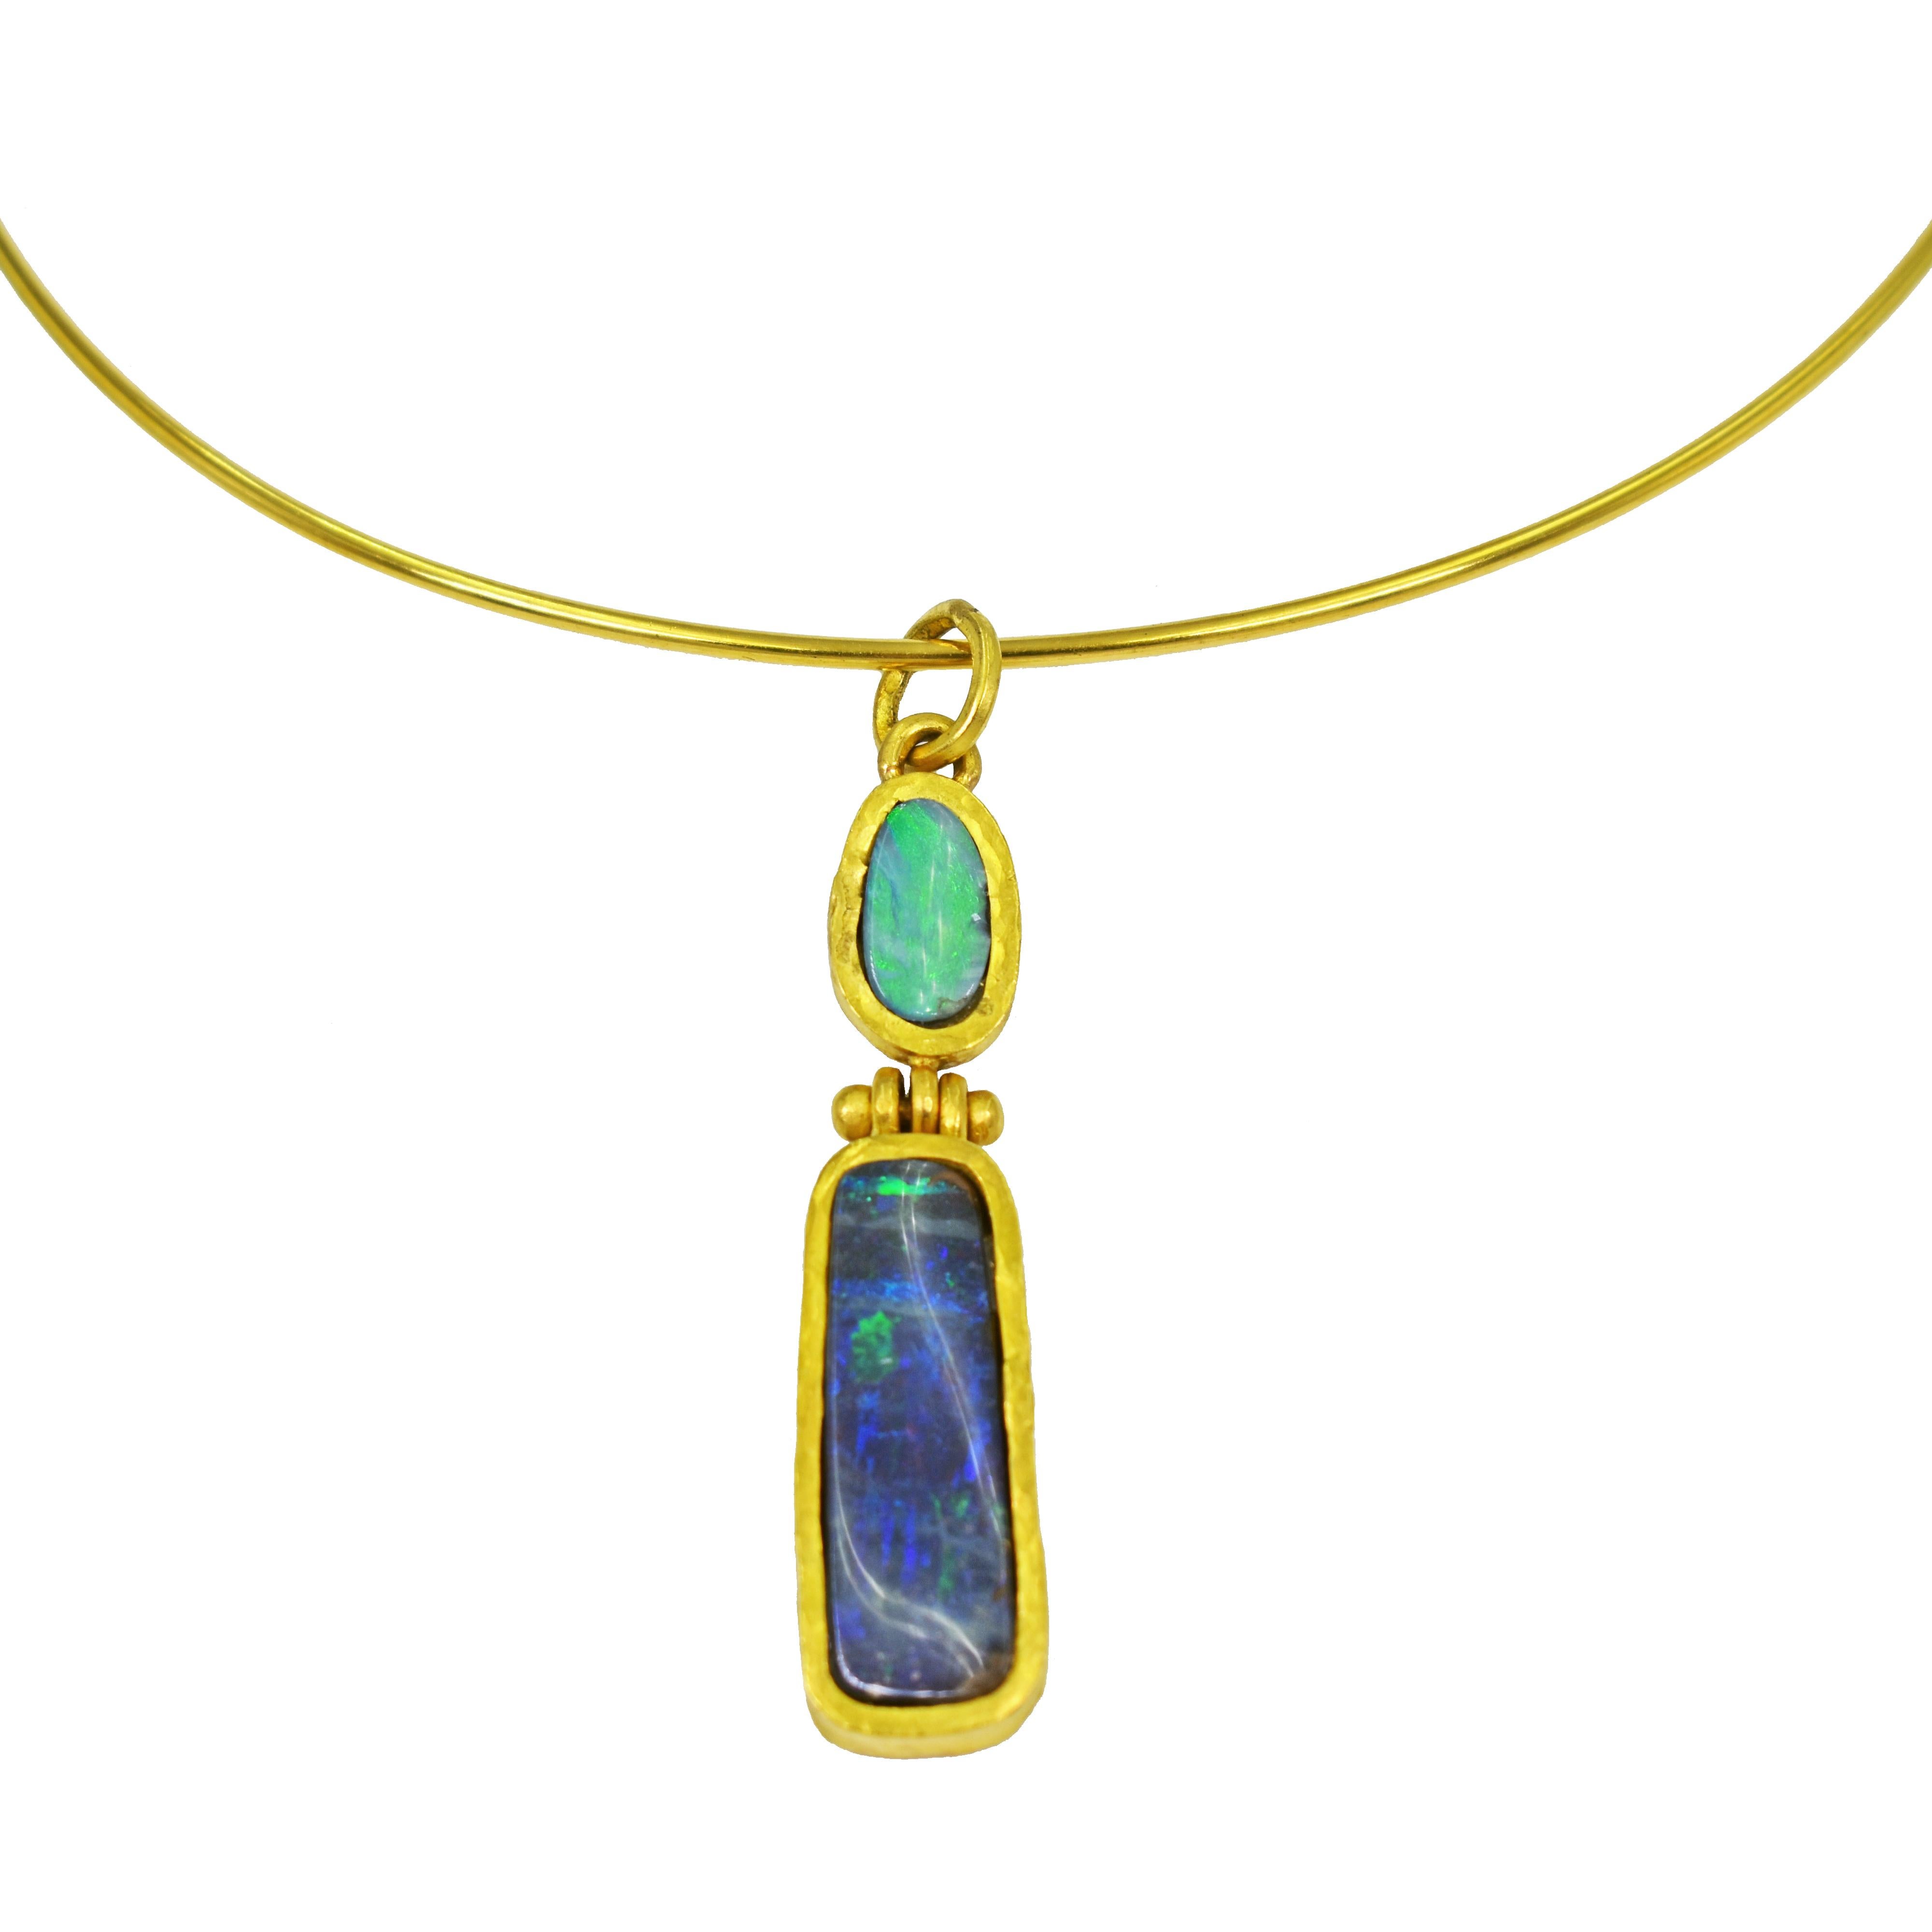 Australian Boulder Opal and hammered 22k yellow gold hinged pendant on 22k wire collar necklace. Neck wire is 15 inches in length. Pendant, including bail, is 2.32 inches in length. Back of pendant is signed 22k and VO. Gorgeous green / blue Opals